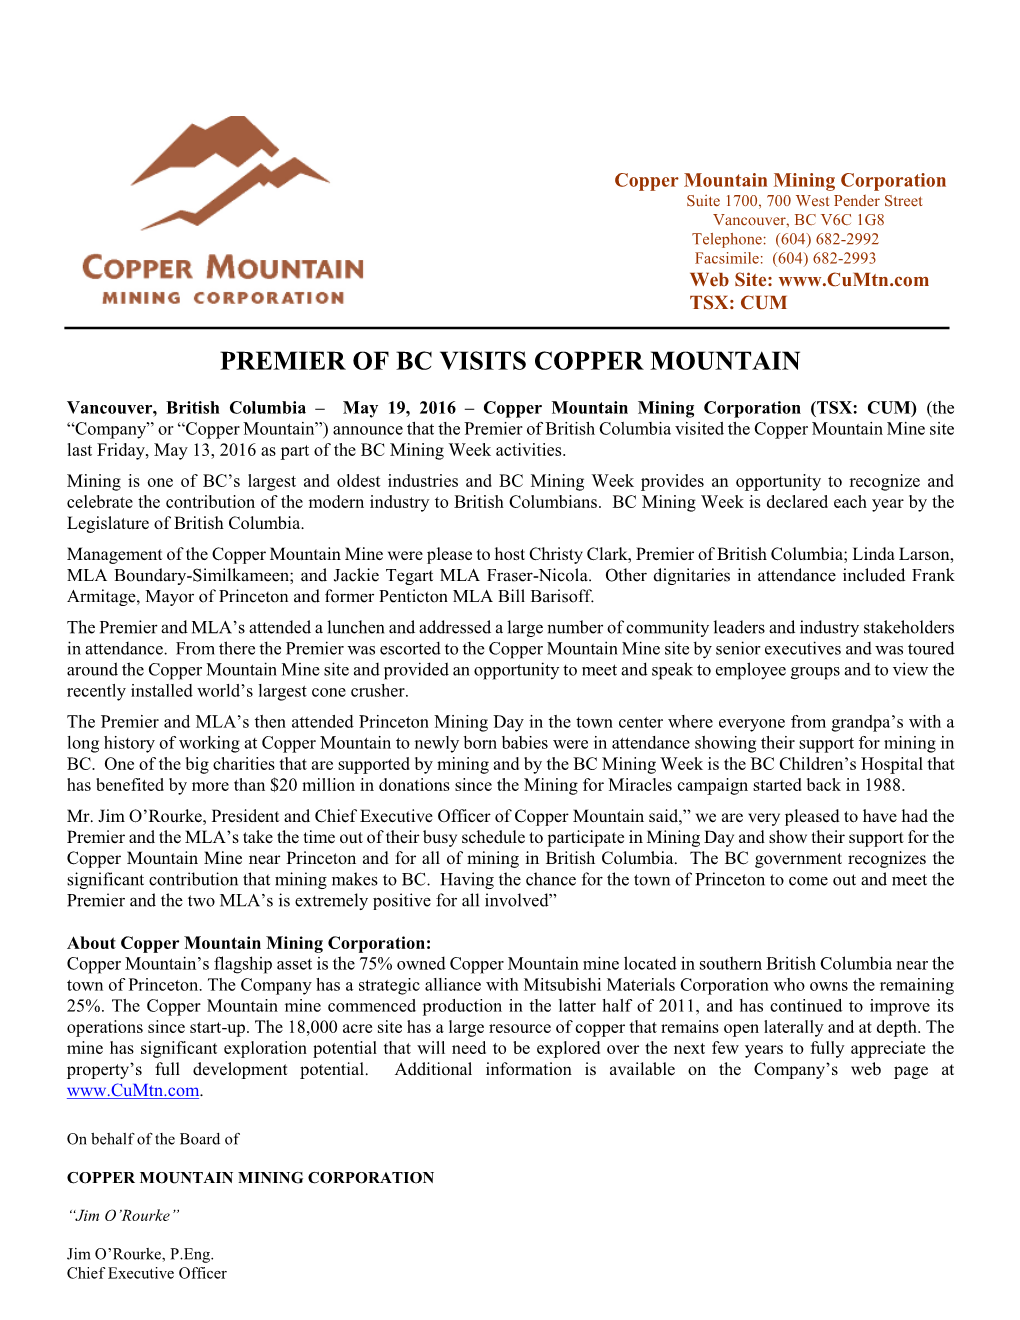 Premier of Bc Visits Copper Mountain